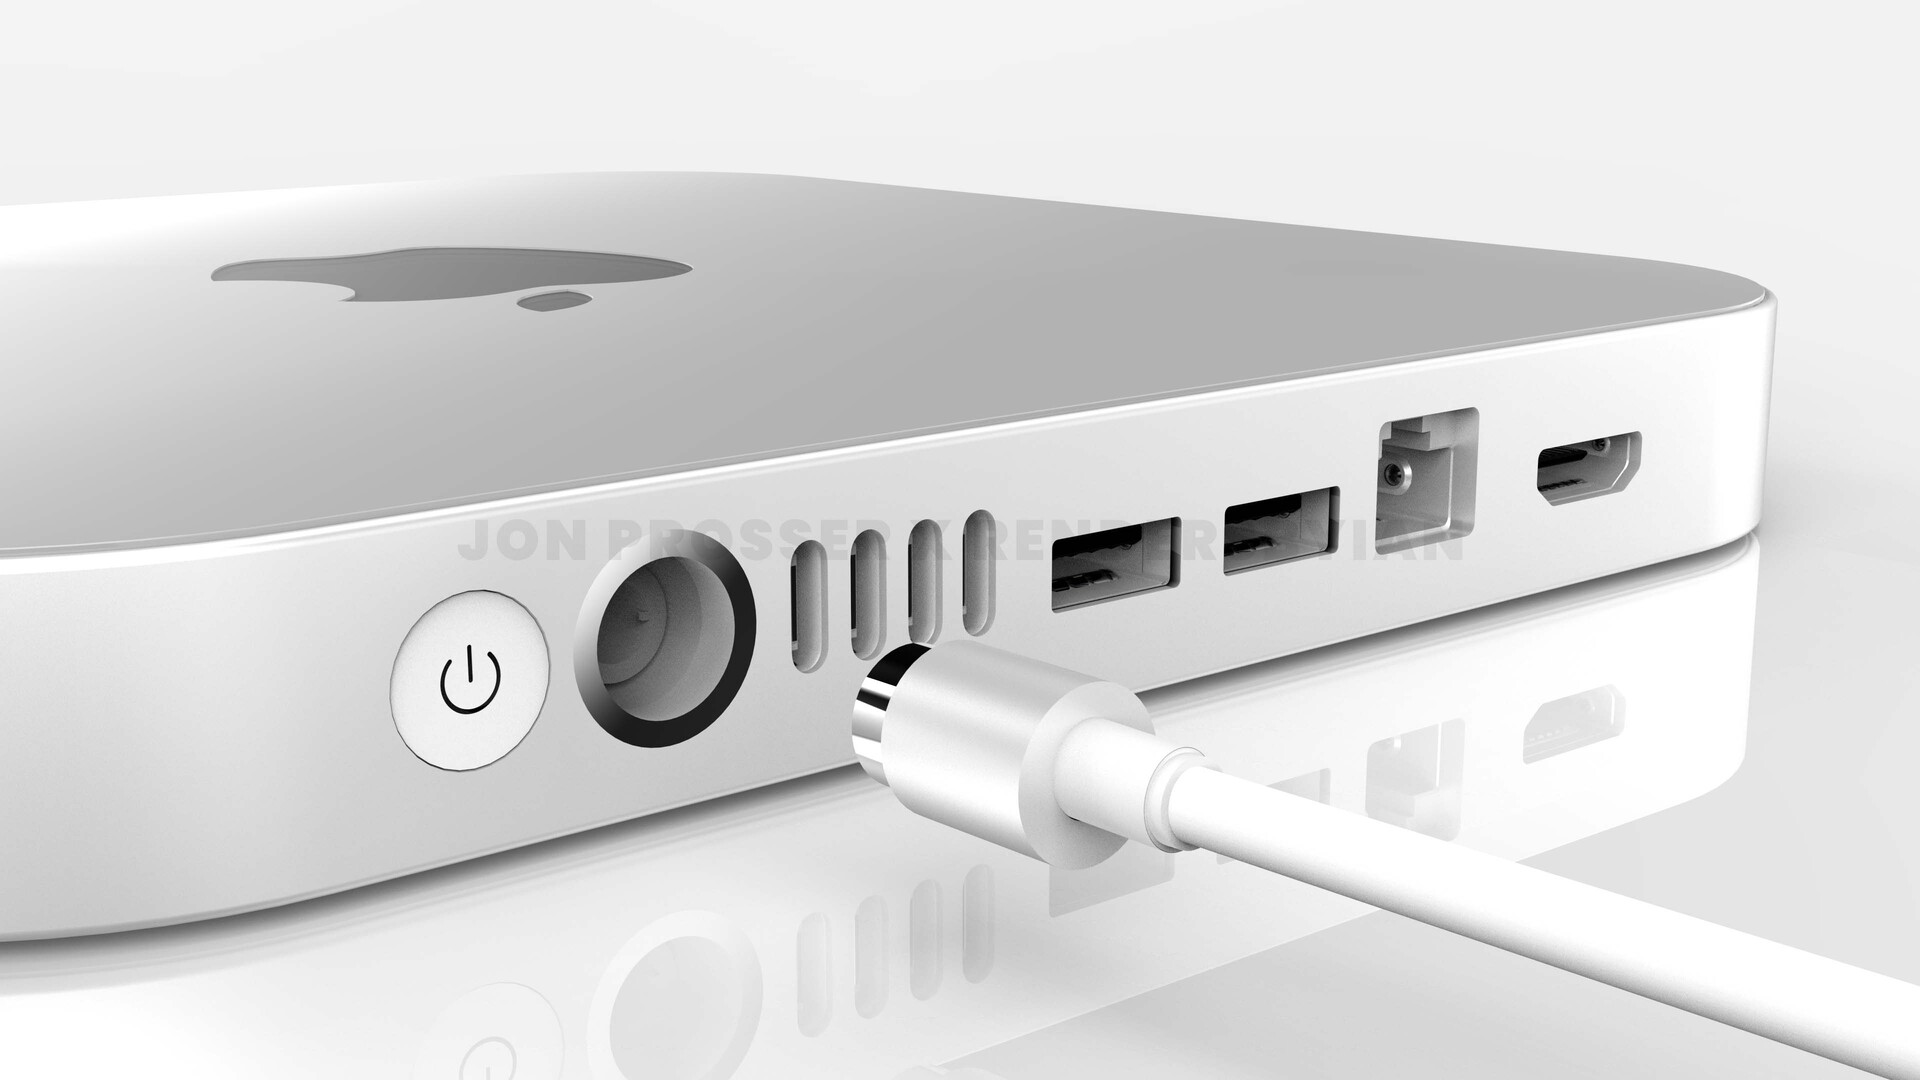 Original Mac mini schematics leak with a refreshed and slimmer form